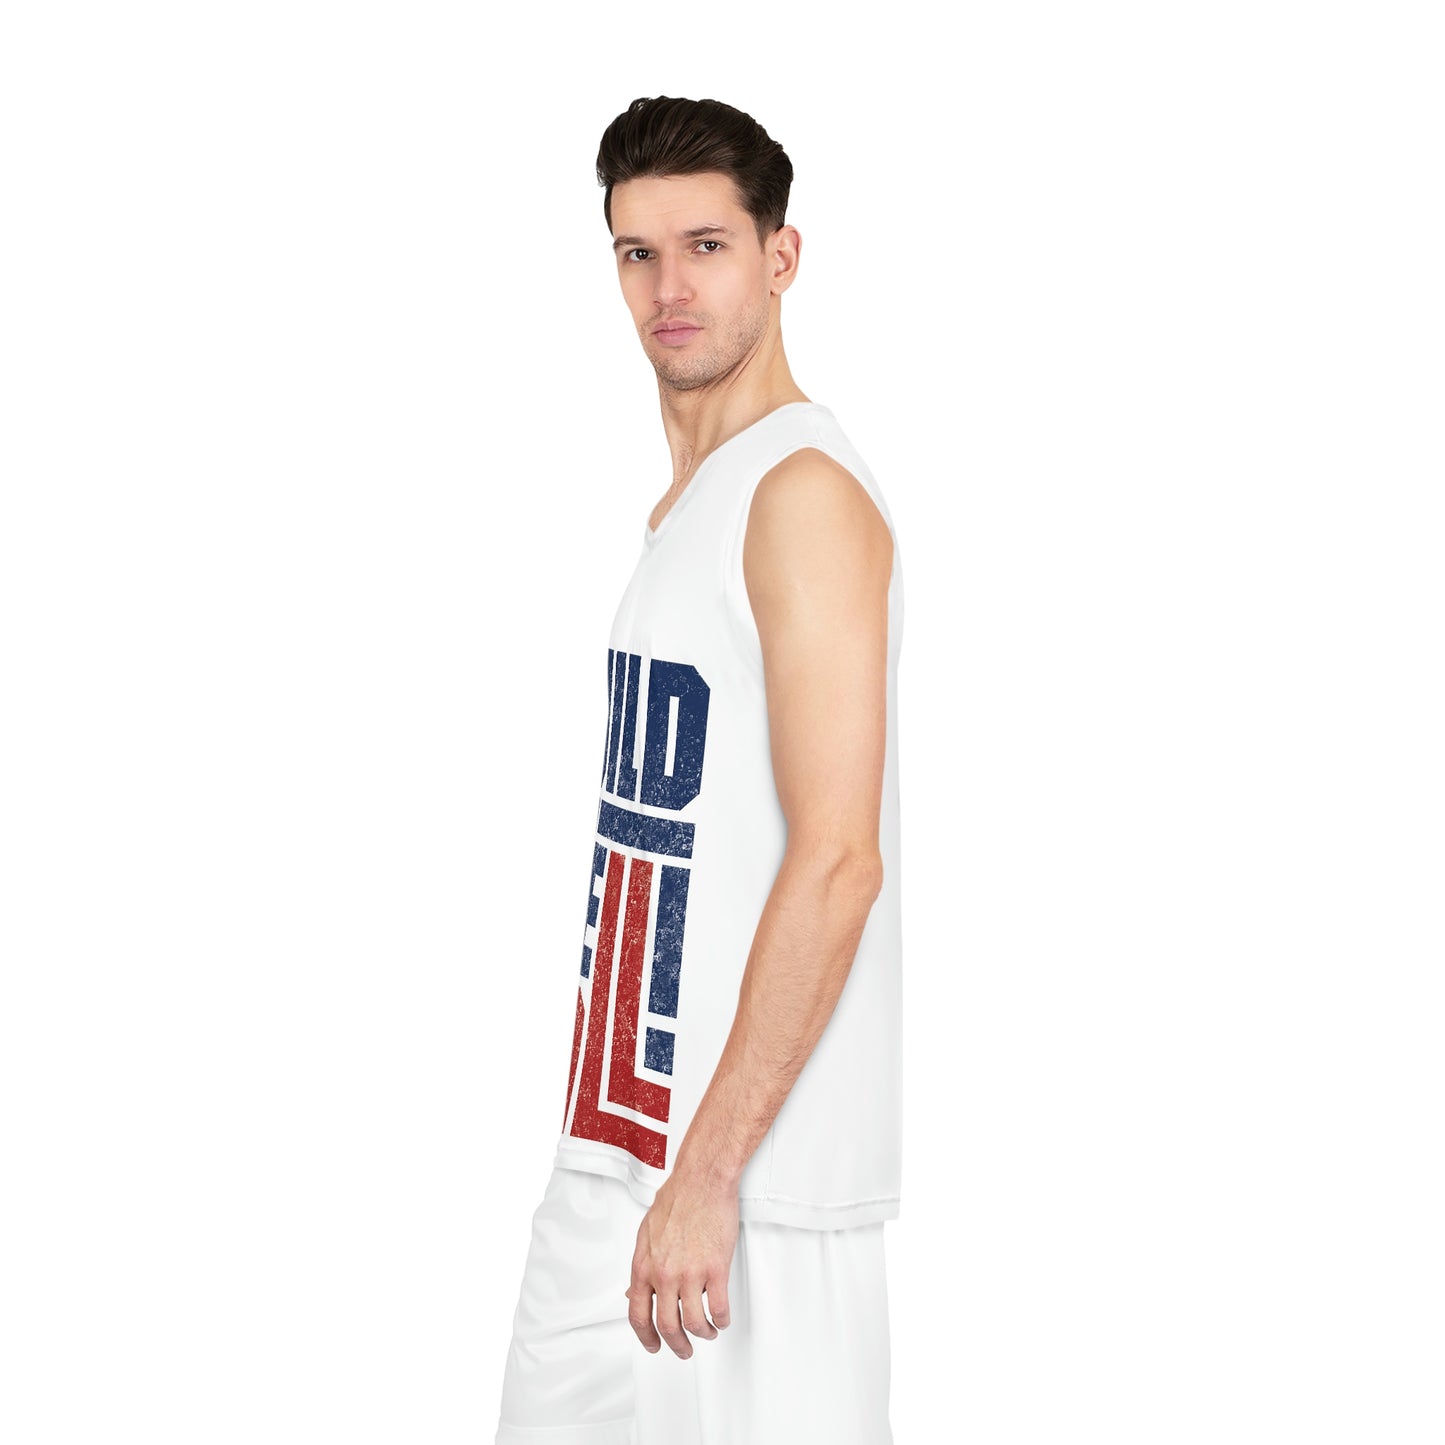 "Build the Wall" Basketball Jersey